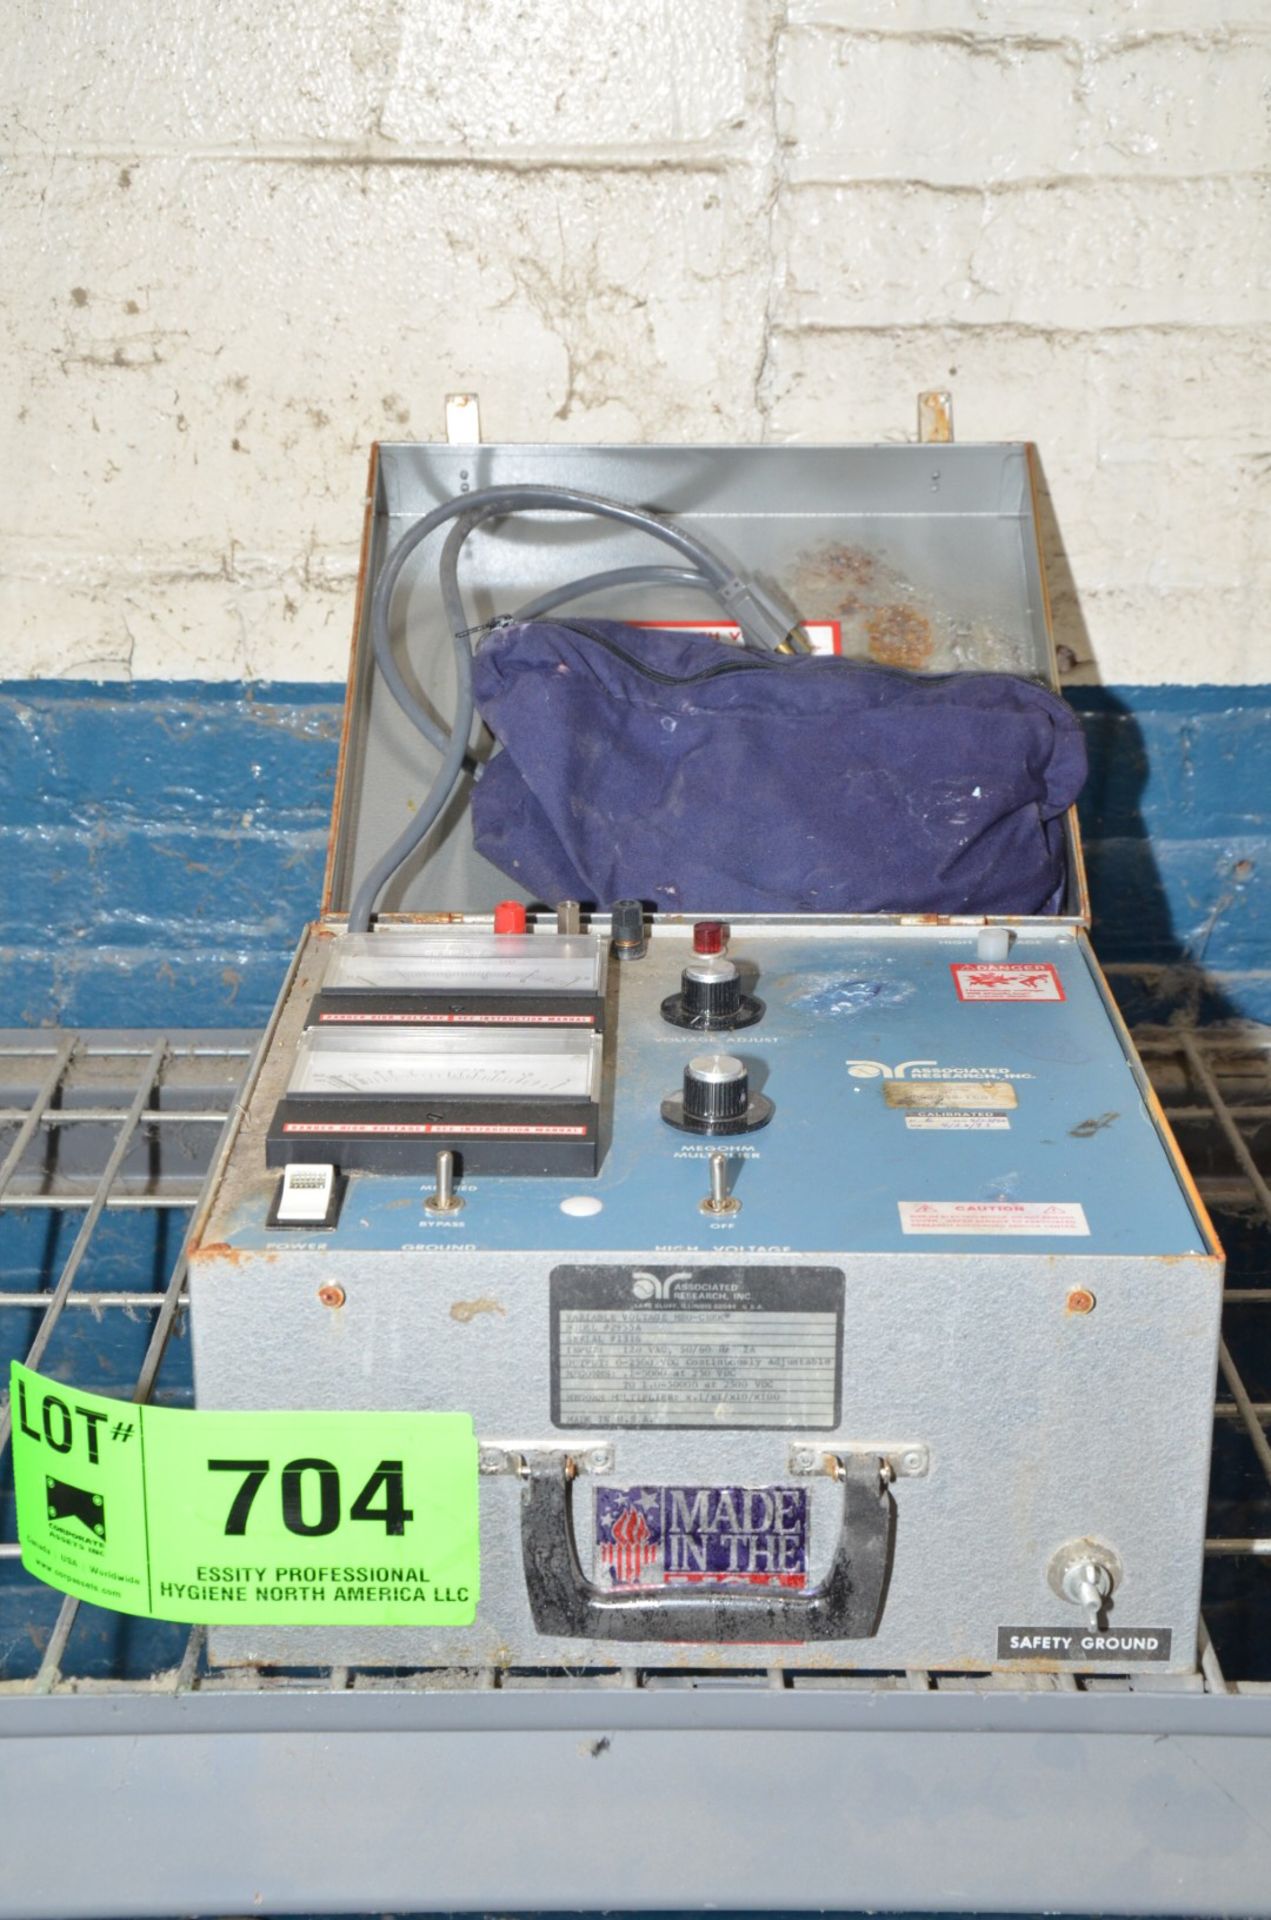 ASSOCIATED RESEARCH VARIABLE VOLTAGE MEG-CHECK TESTER, S/N N/A [RIGGING FEE FOR LOT #704 - $25 USD